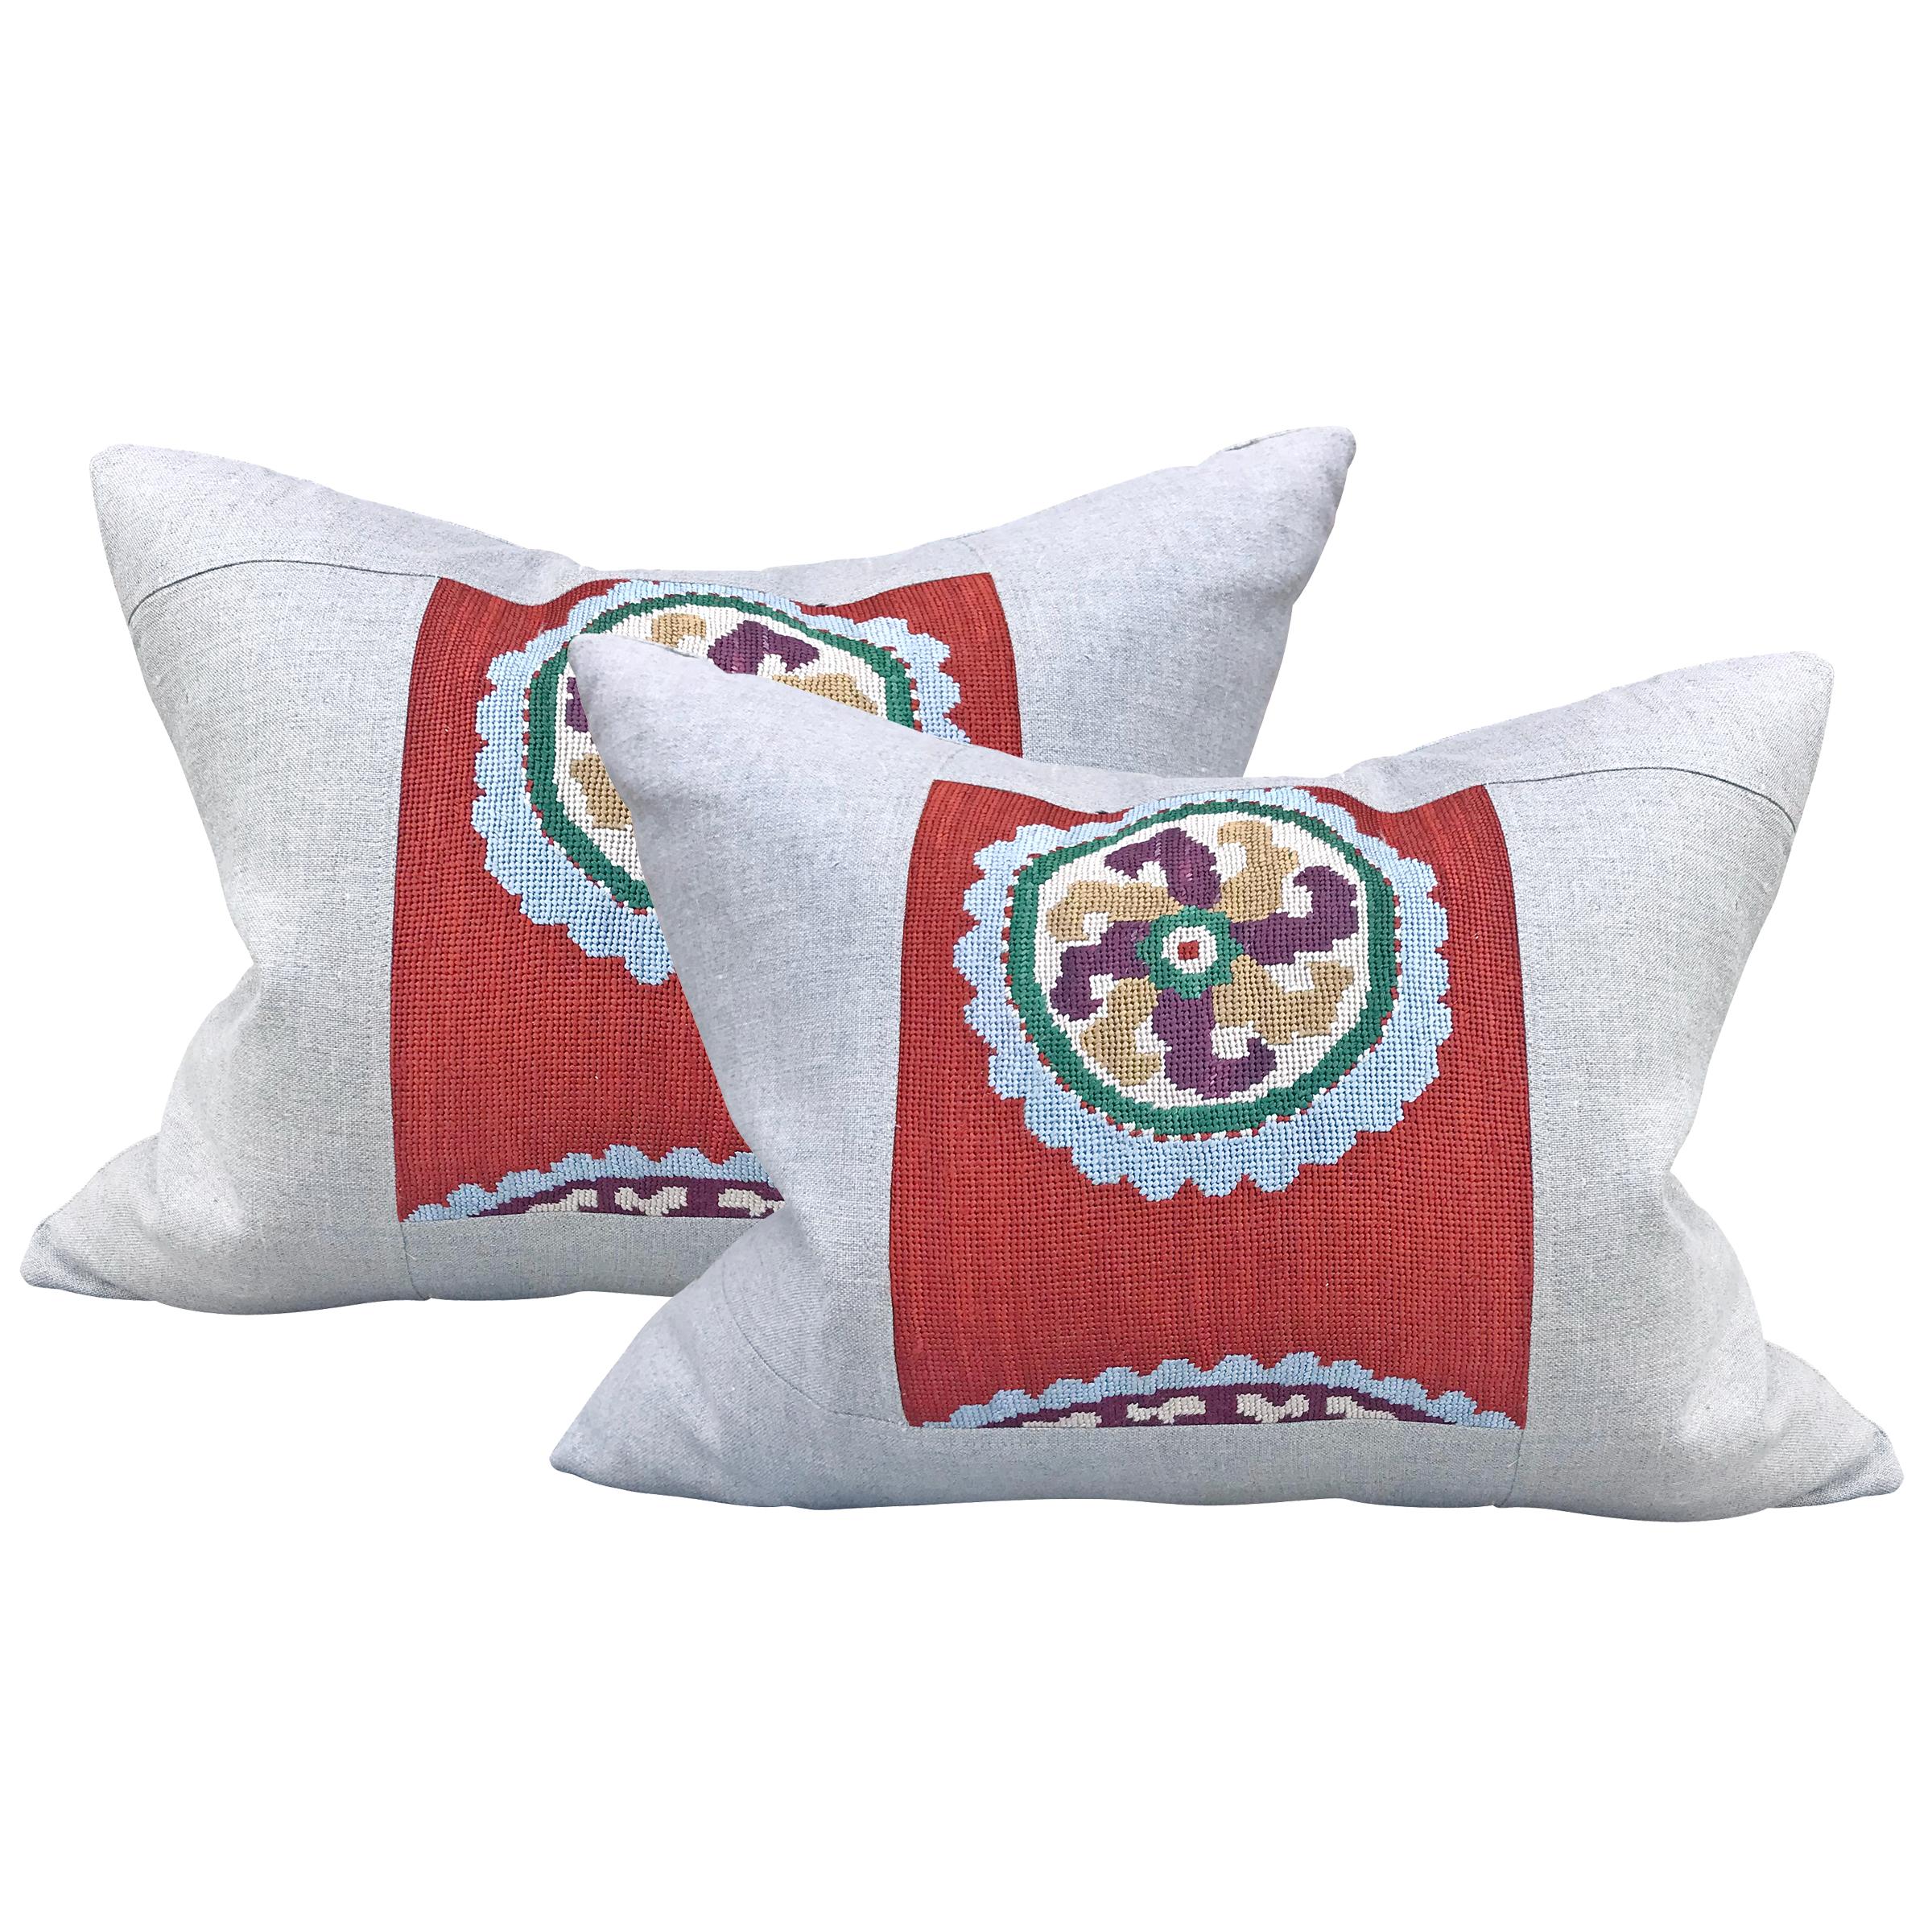 Pair of Early 20th Century Uzbek Embroidered Pillows